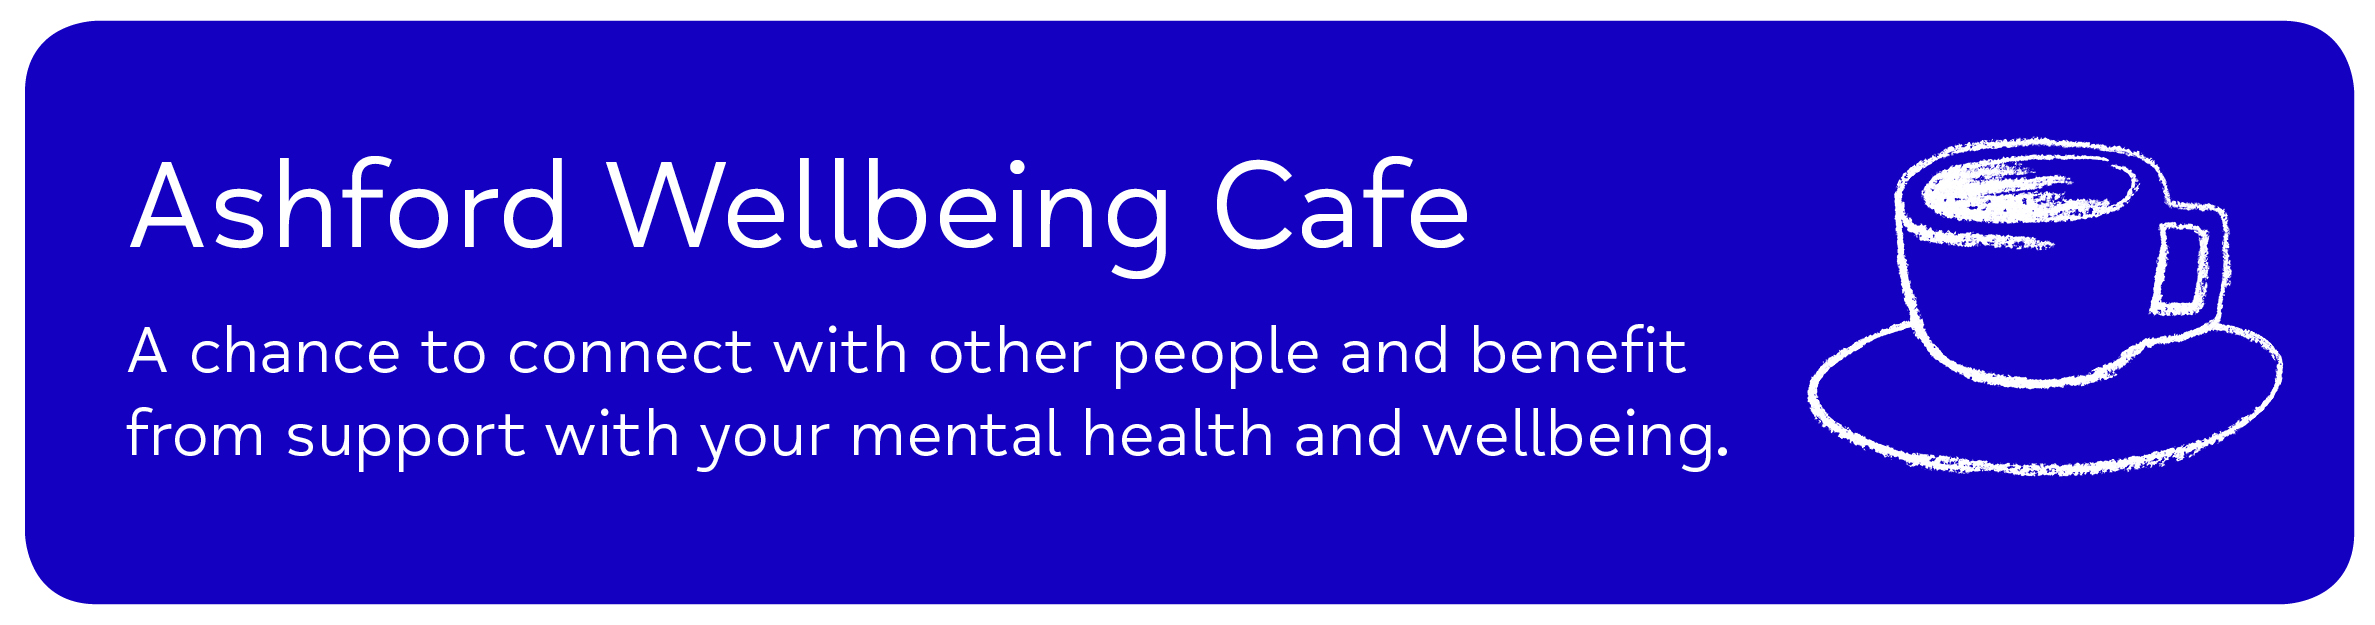 Ashford Wellbeing Cafe A chance to connect with other people and benefit from support with your mental health and wellbeing.